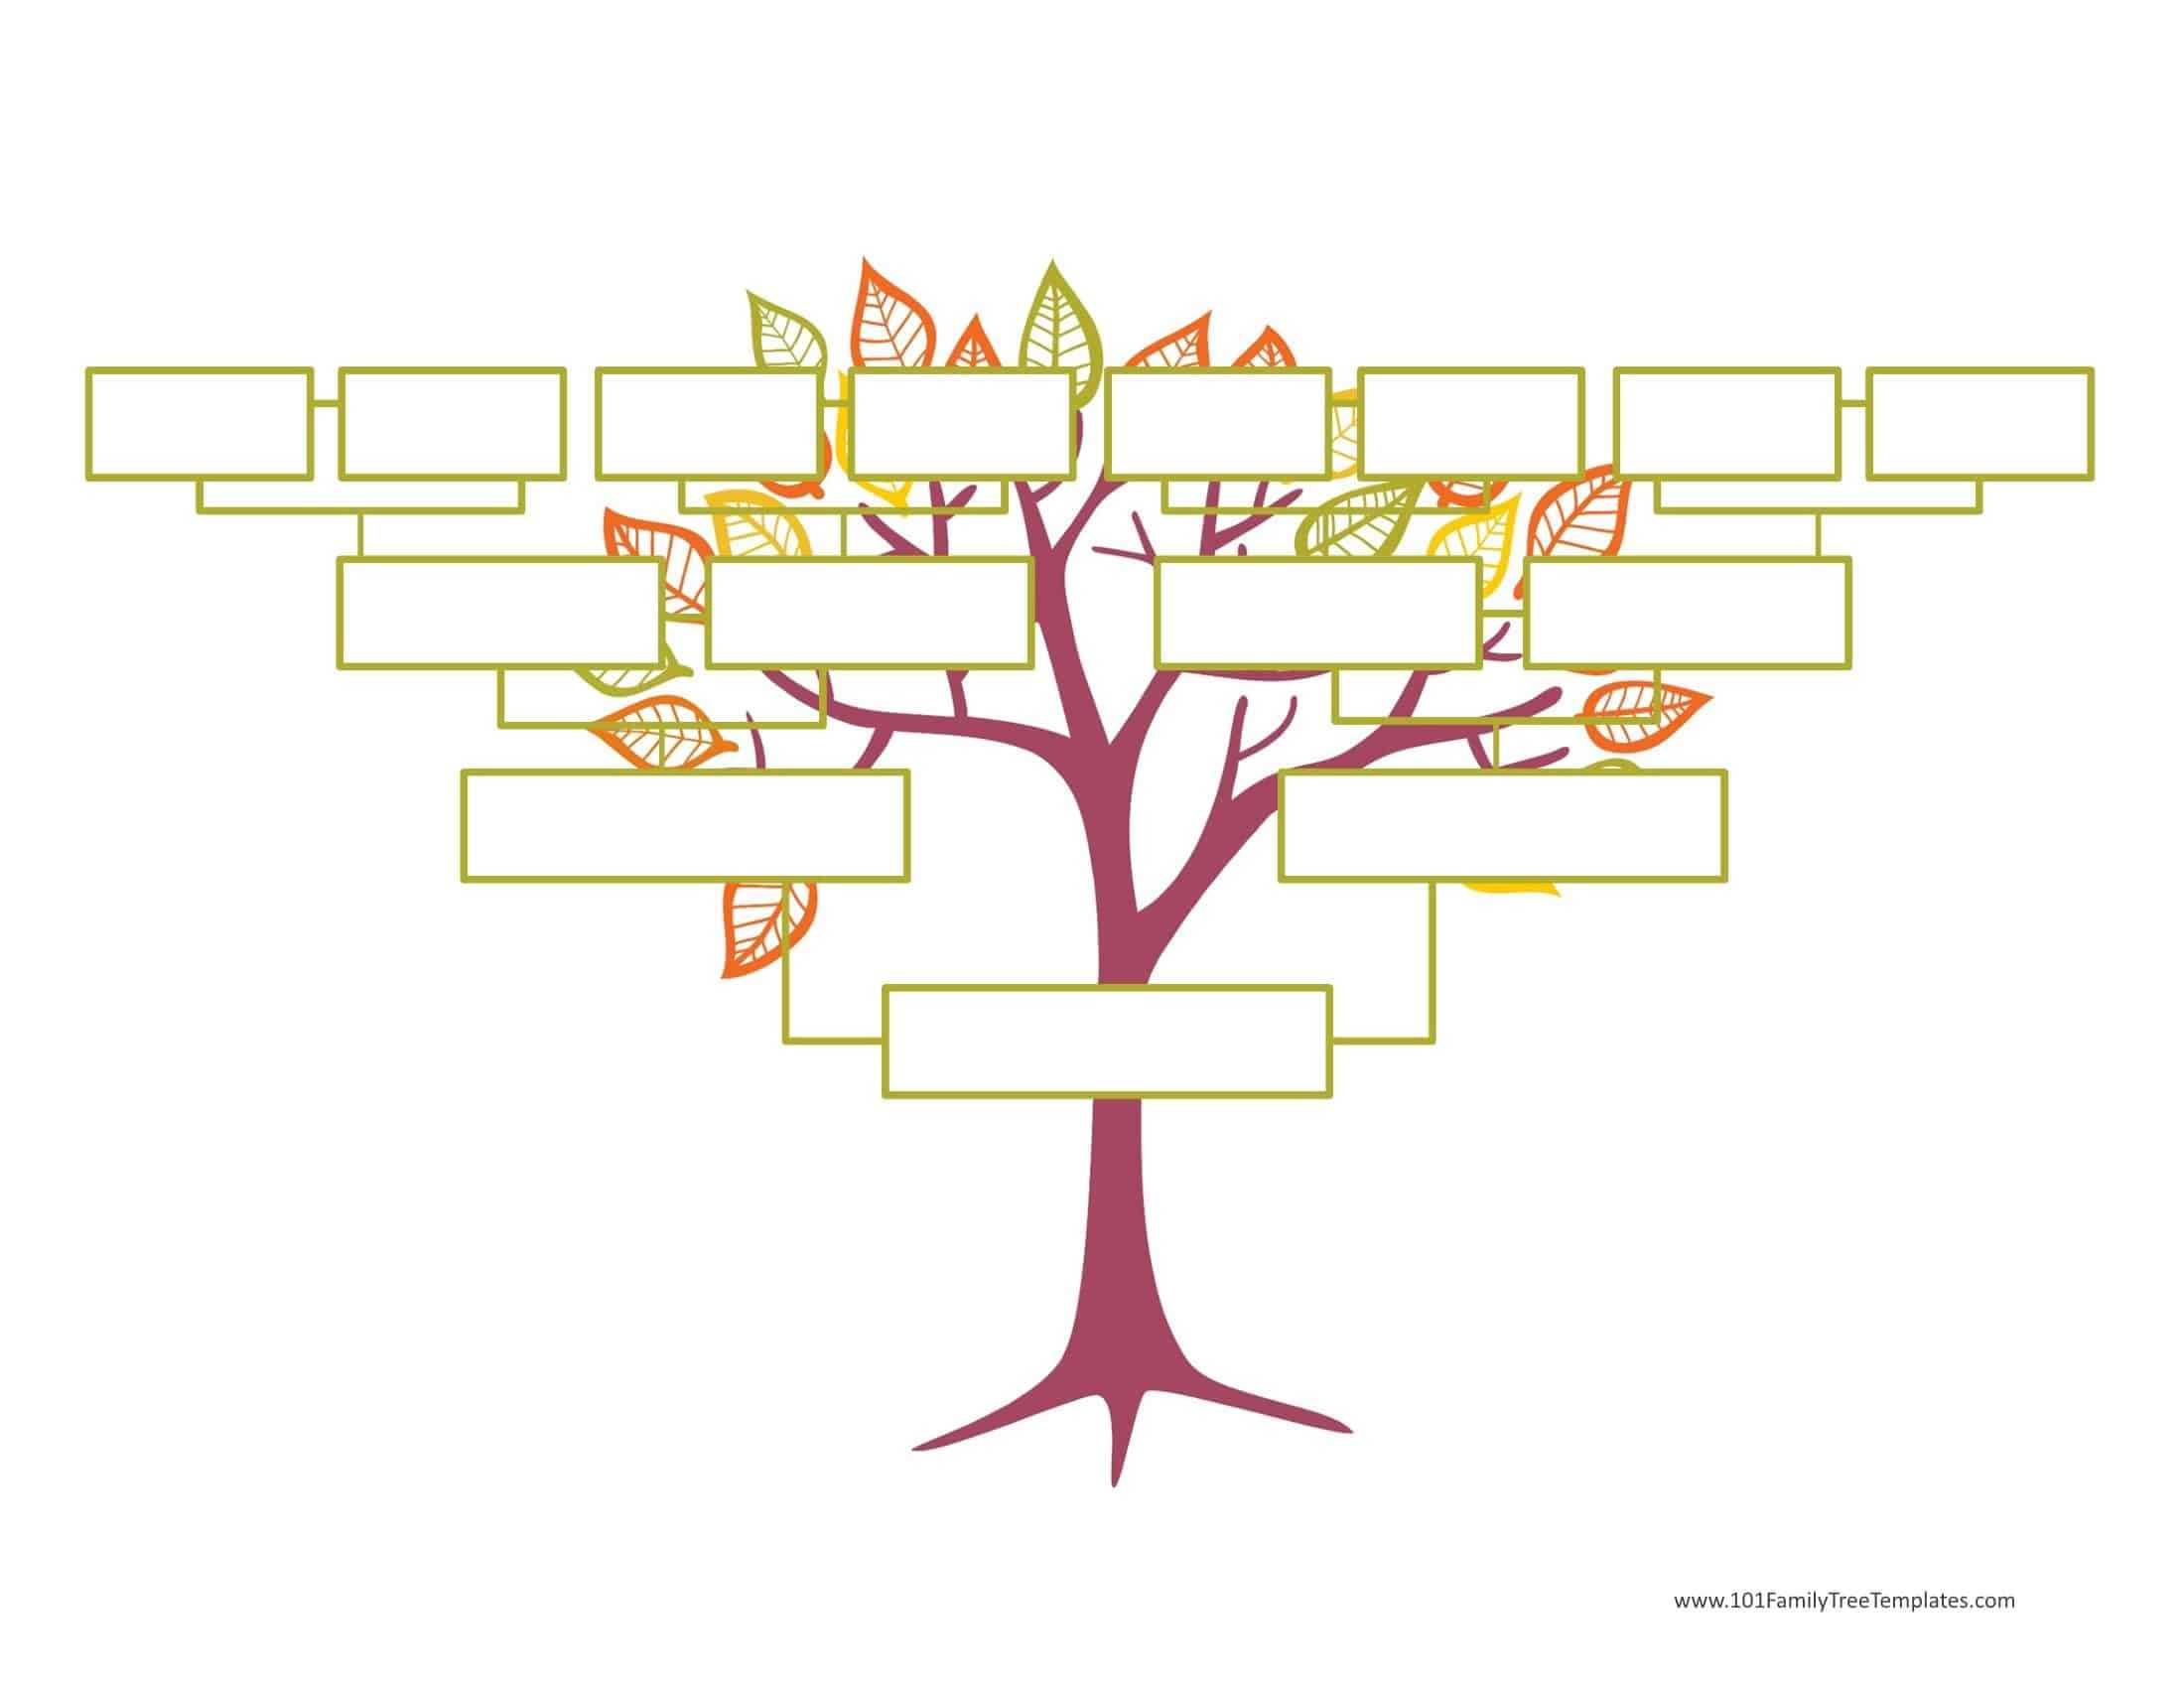 Blank Family Tree Template | Free Instant Download Intended For Fill In The Blank Family Tree Template